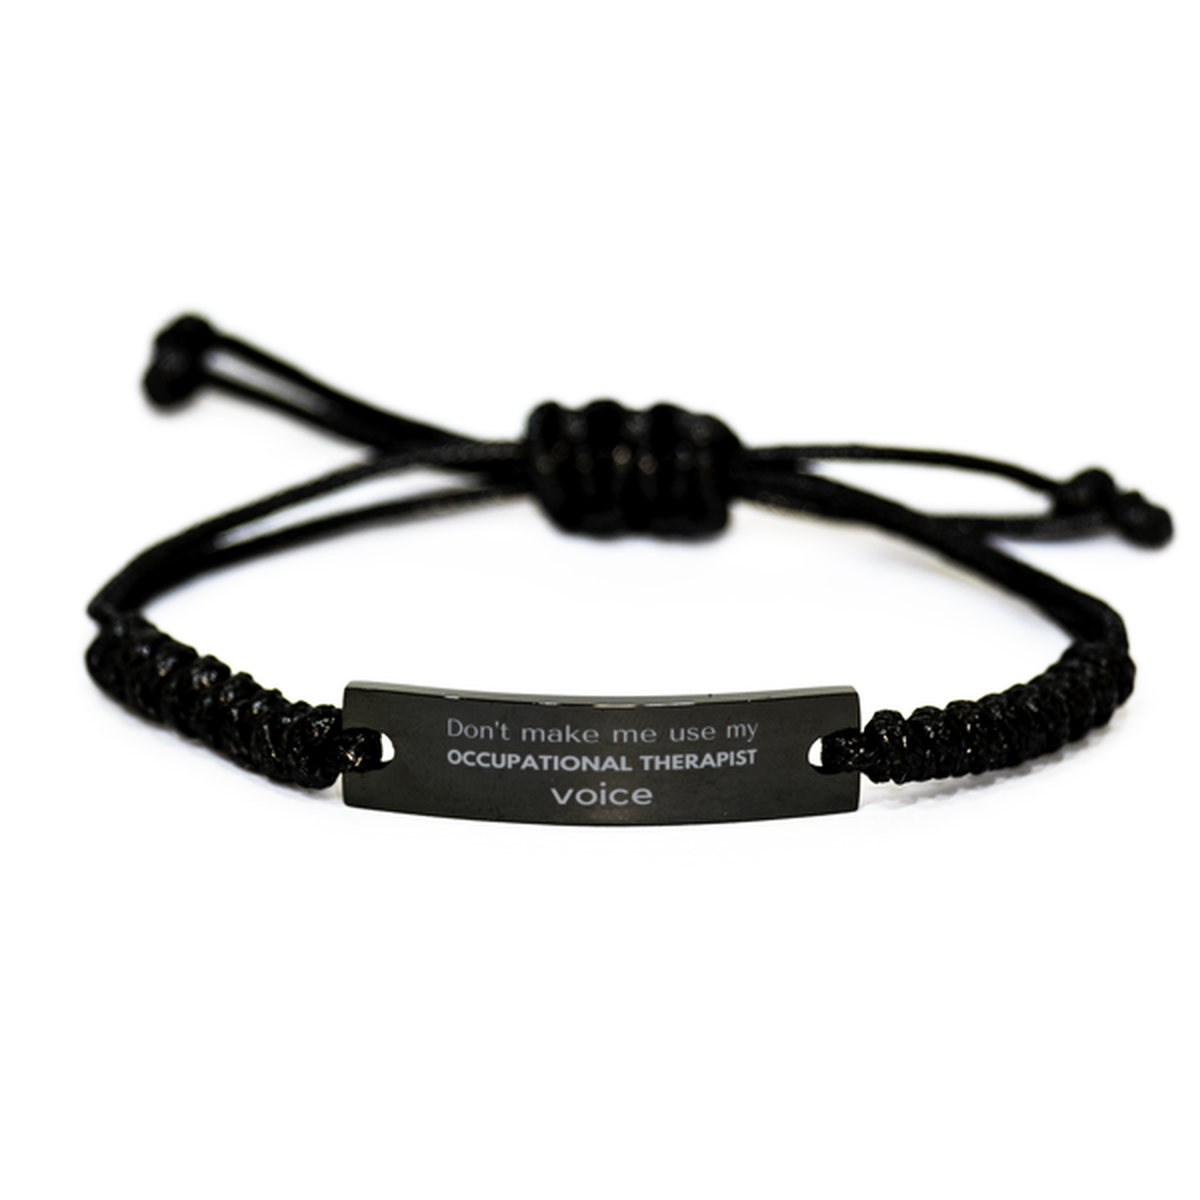 Don't make me use my Occupational Therapist voice, Sarcasm Occupational Therapist Gifts, Christmas Occupational Therapist Black Rope Bracelet Birthday Unique Gifts For Occupational Therapist Coworkers, Men, Women, Colleague, Friends